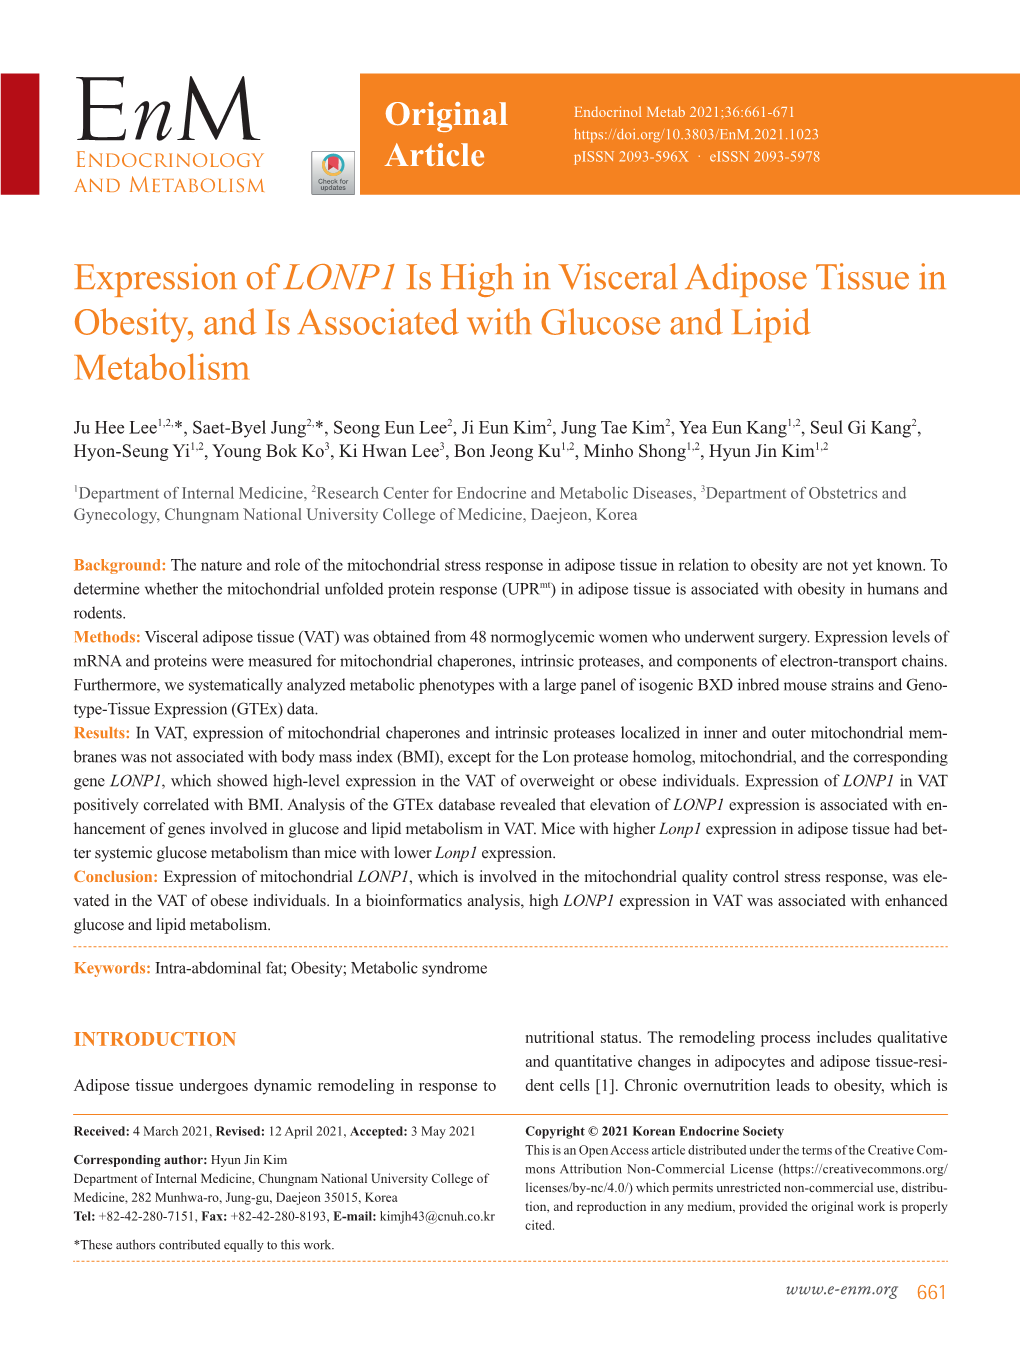 Expression of LONP1 Is High in Visceral Adipose Tissue in Obesity, and Is Associated with Glucose and Lipid Metabolism